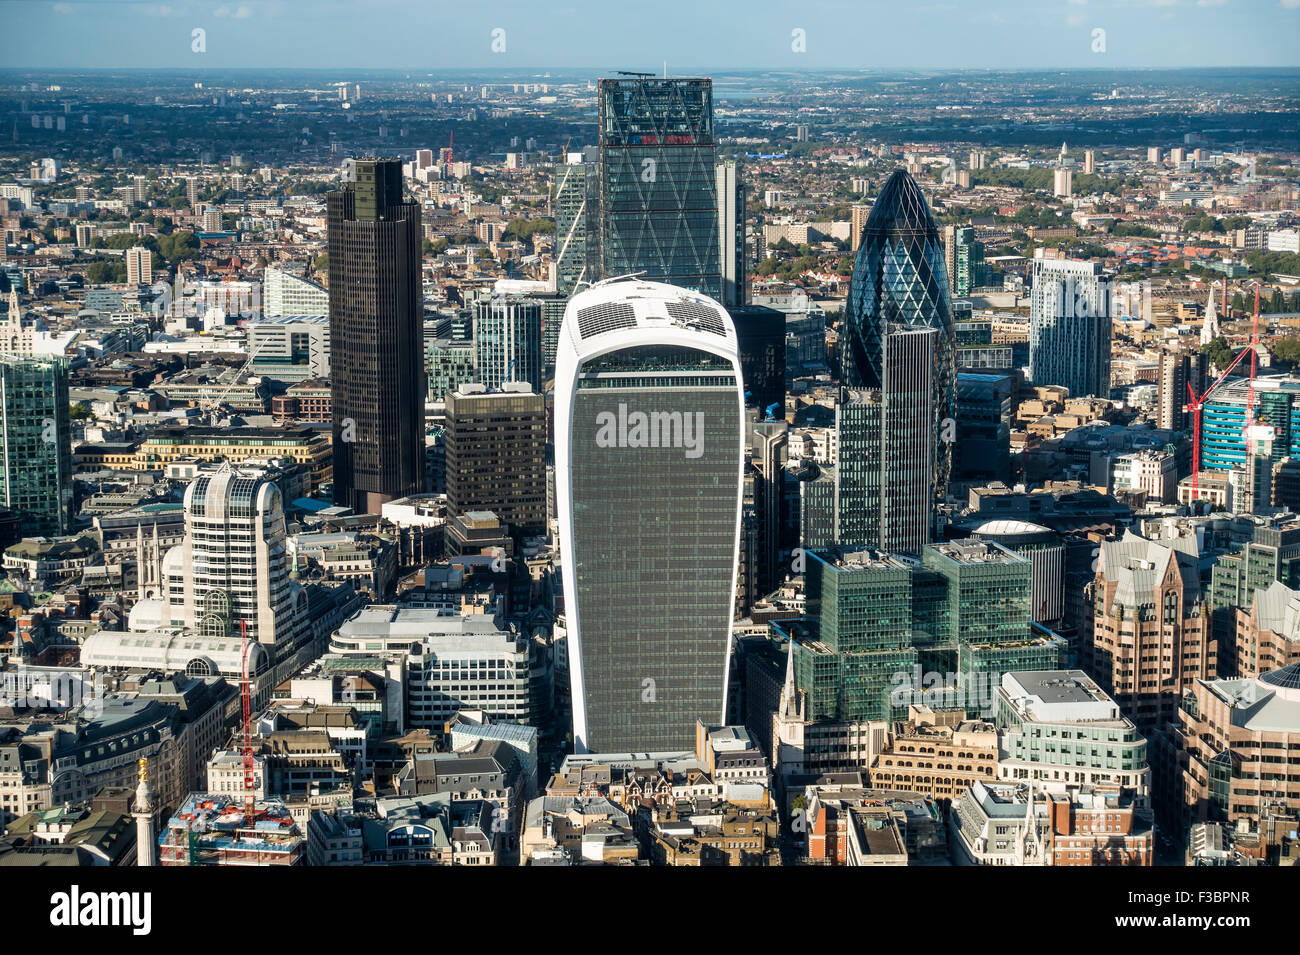 The City Gherkin Walkie Talkie Cheesegrater Buildings View from the Shard London Stock Photo